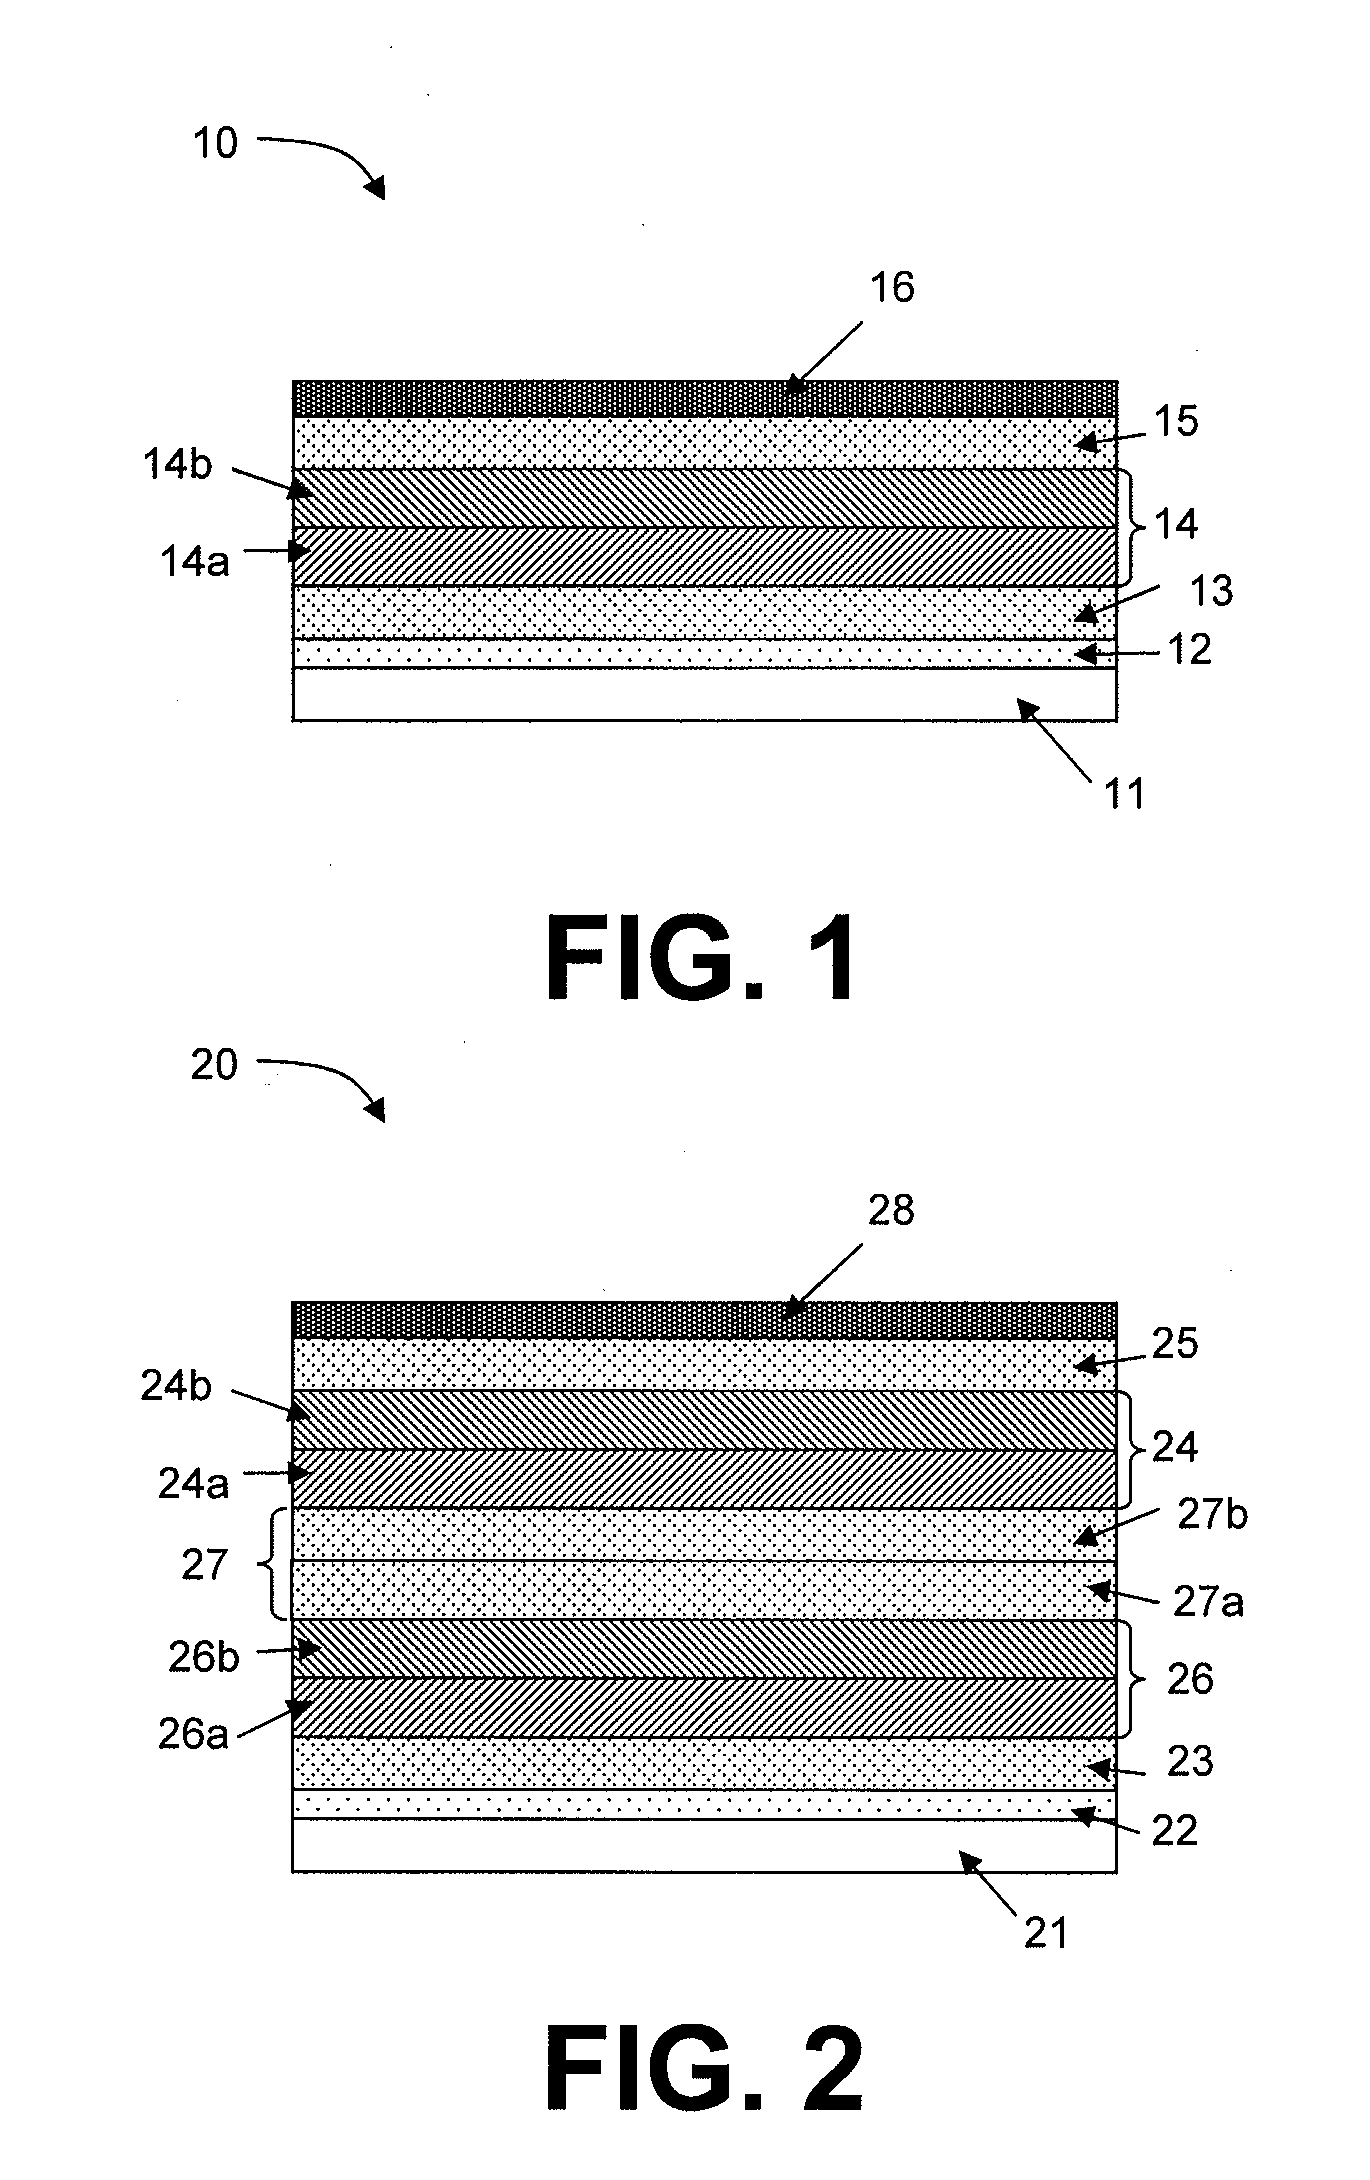 Method for fabricating organic optoelectronic devices